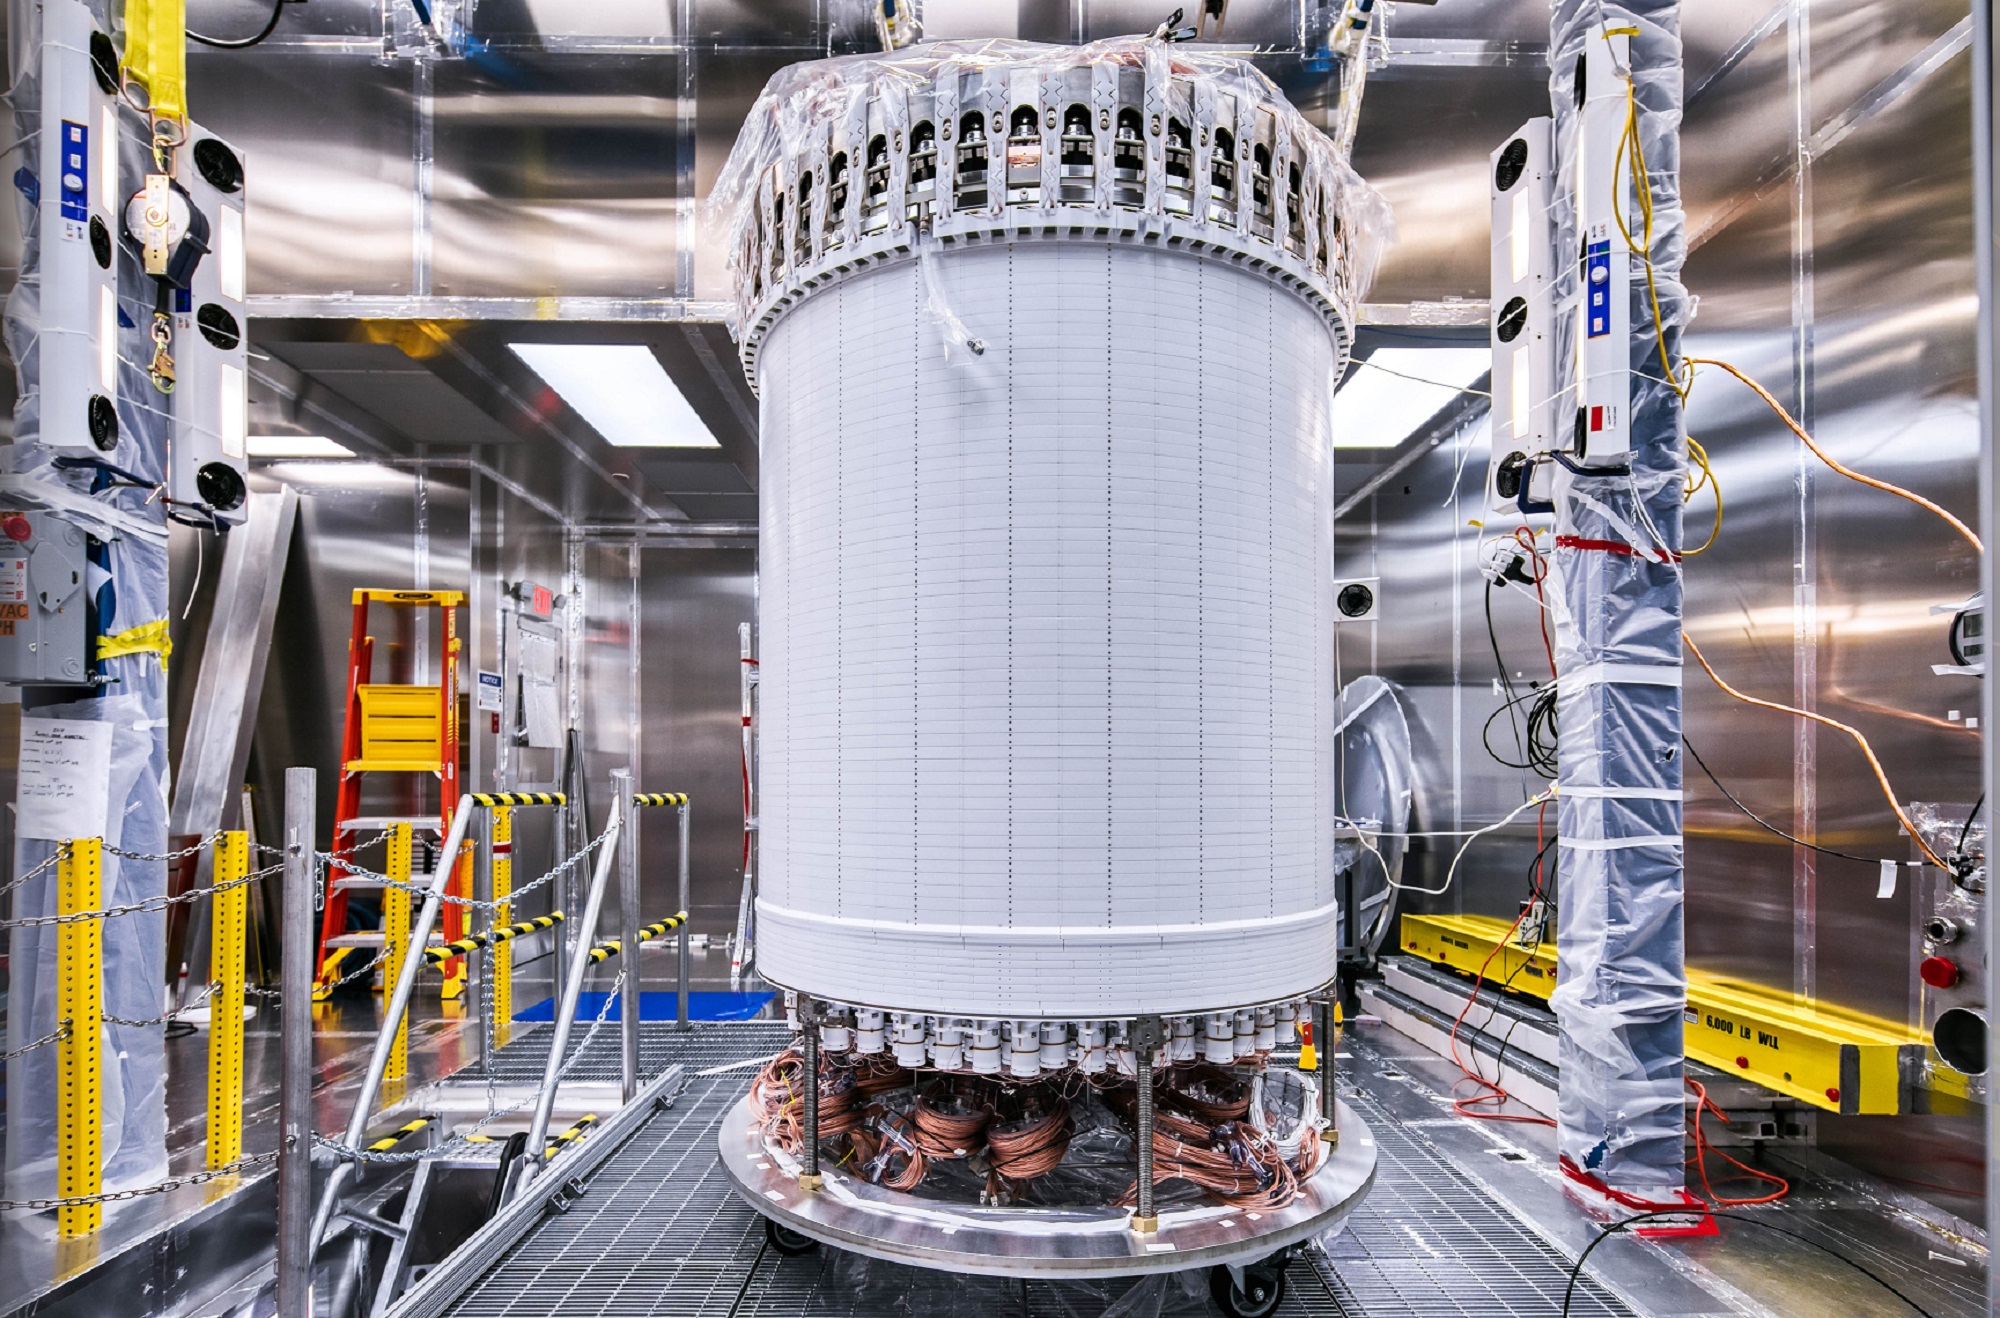 The world’s best dark matter detector whiffed on its first try